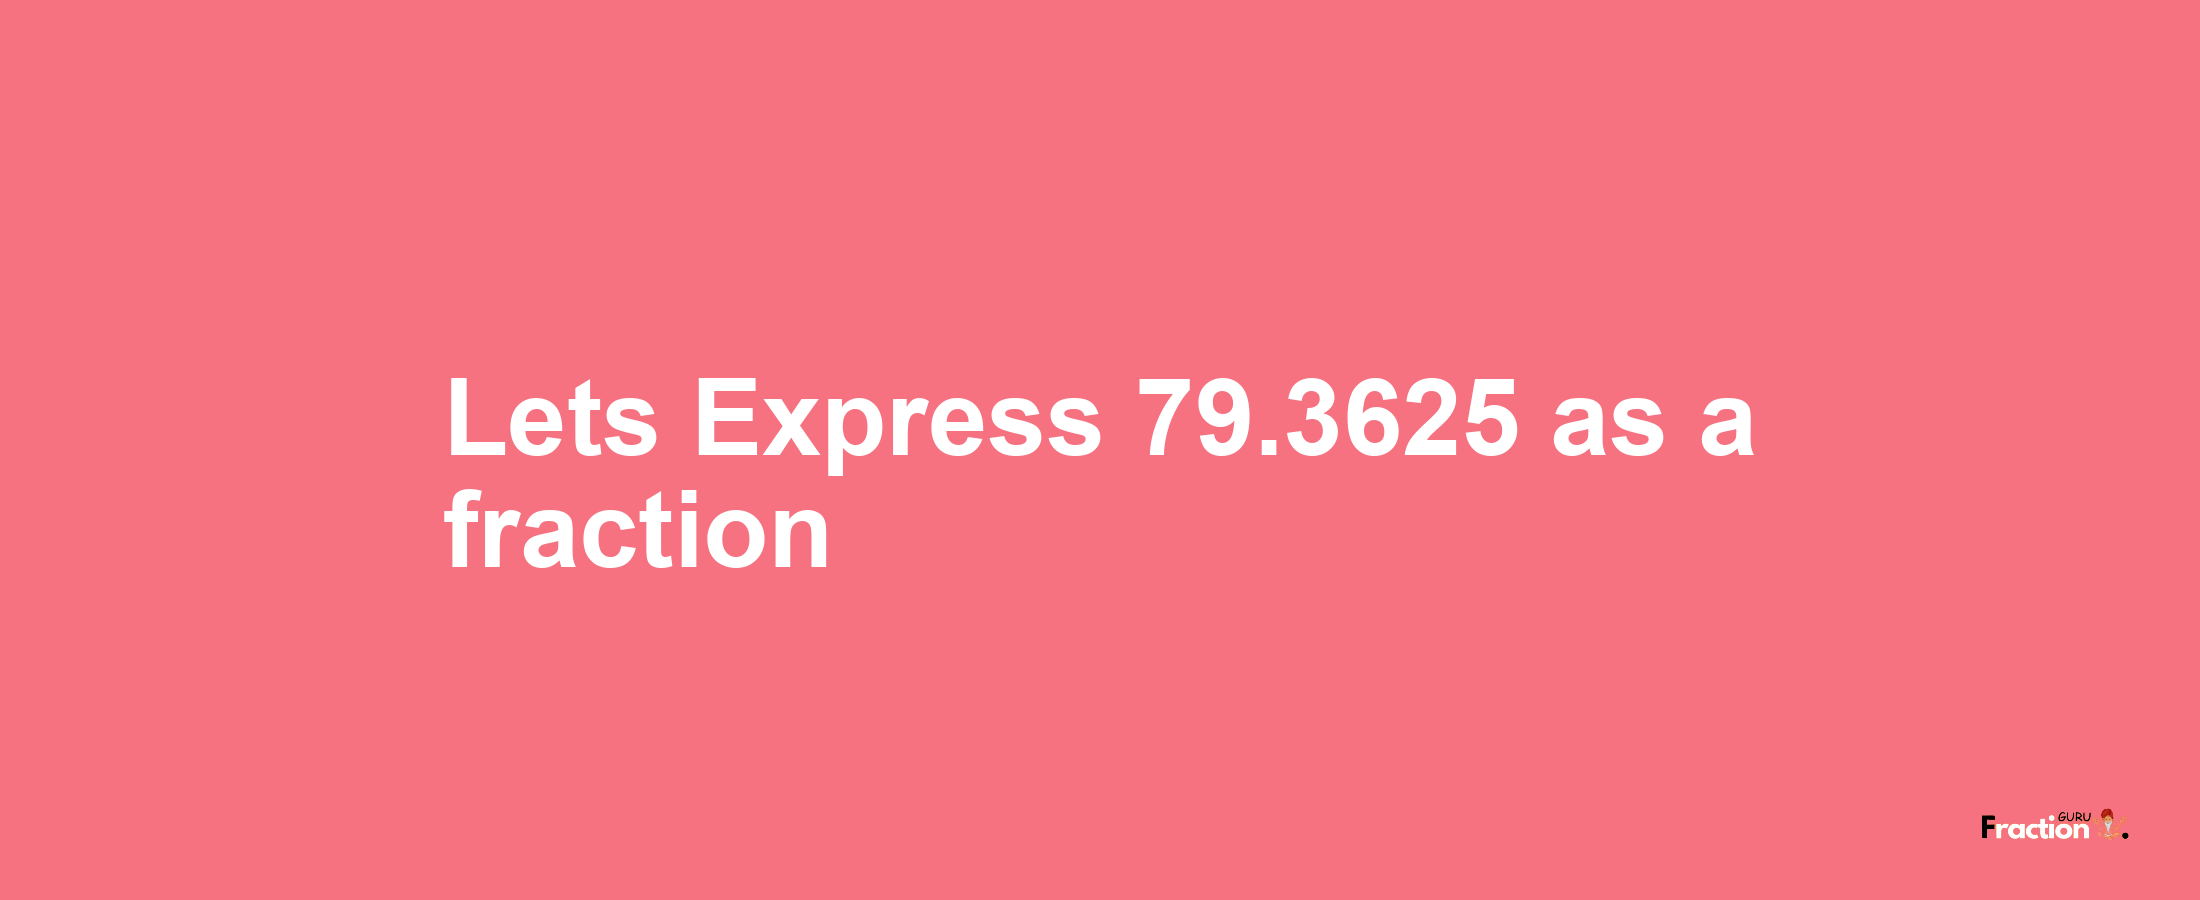 Lets Express 79.3625 as afraction